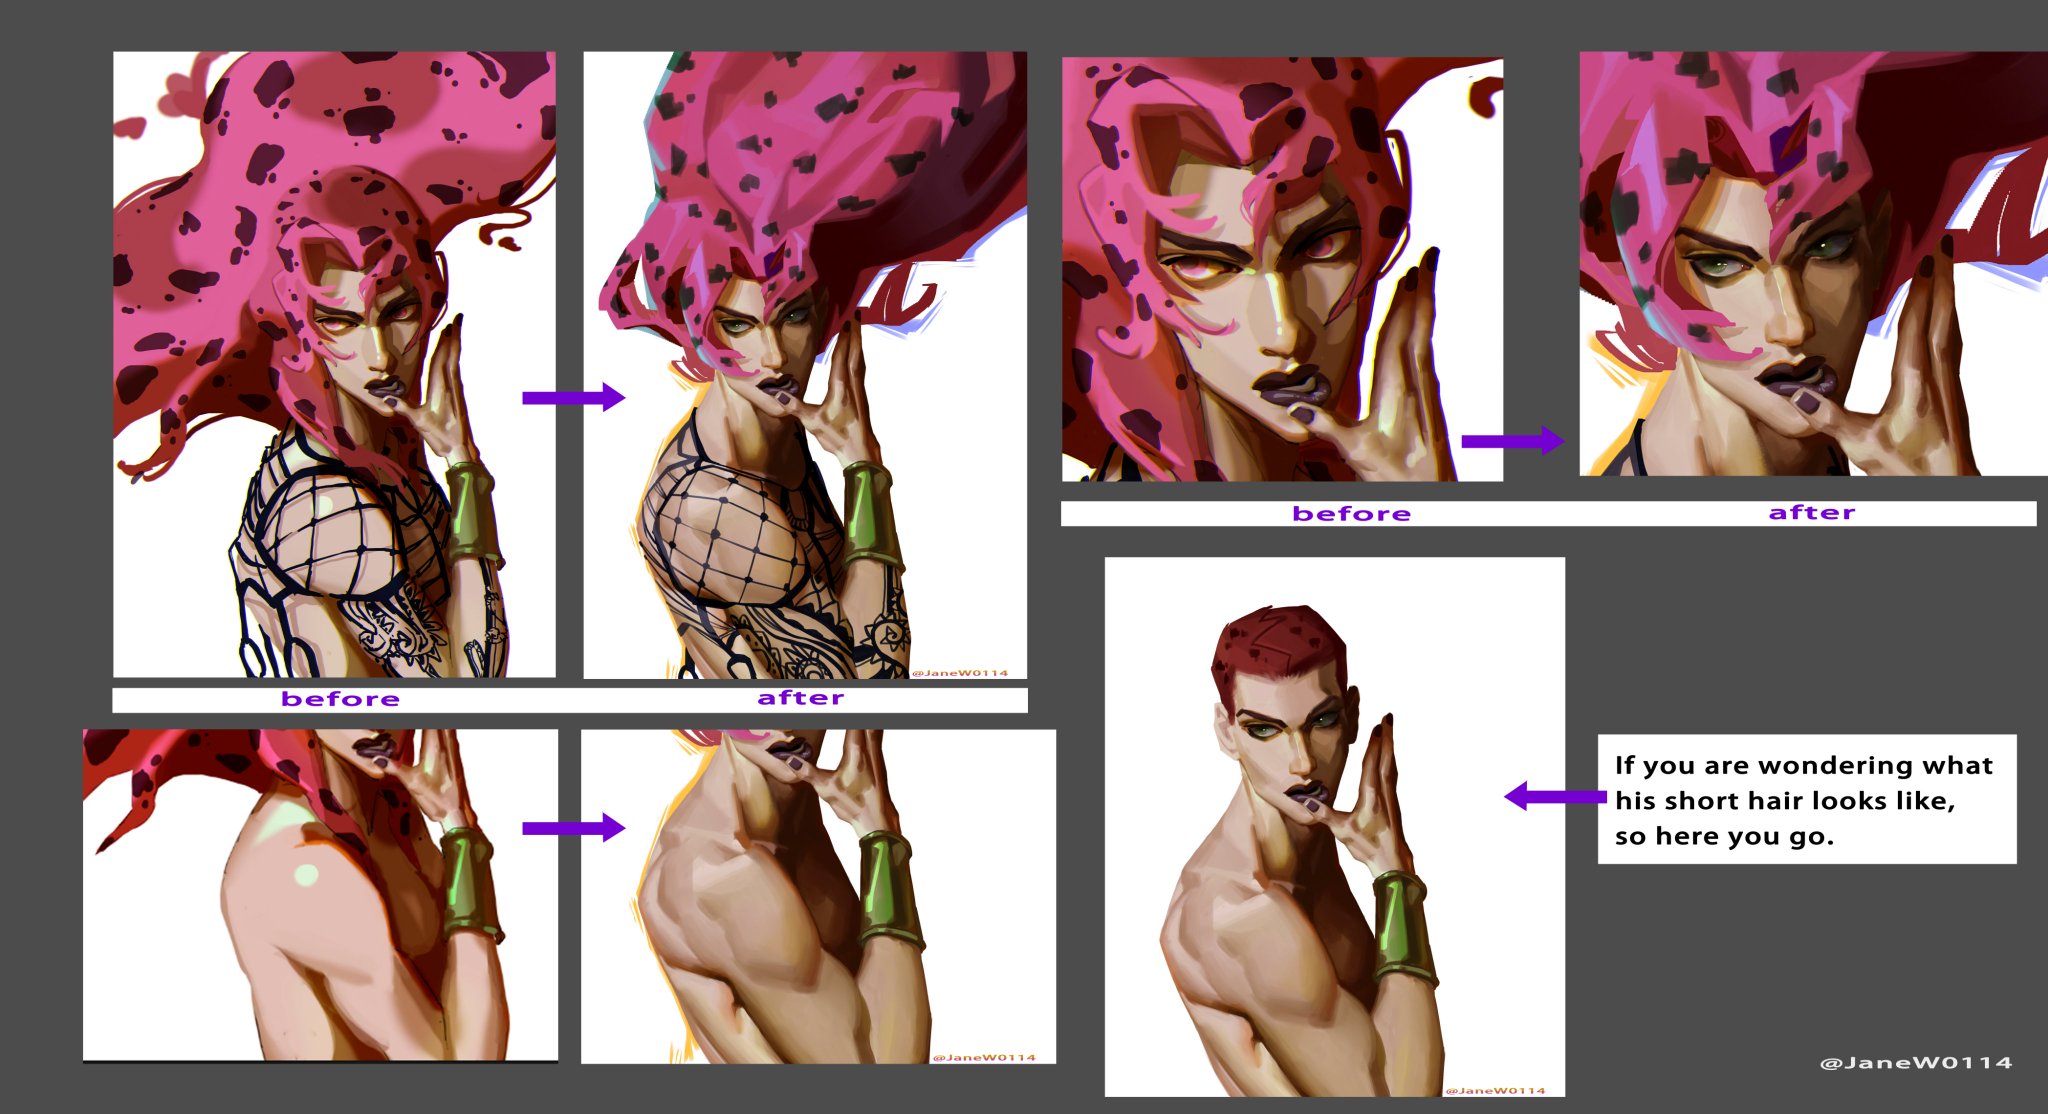  в Twitter: „btw, if you wondering what Diavolo short hair looks  like, here you go. What do you think all of these? /V7CKGyAUHy“  / Twitter